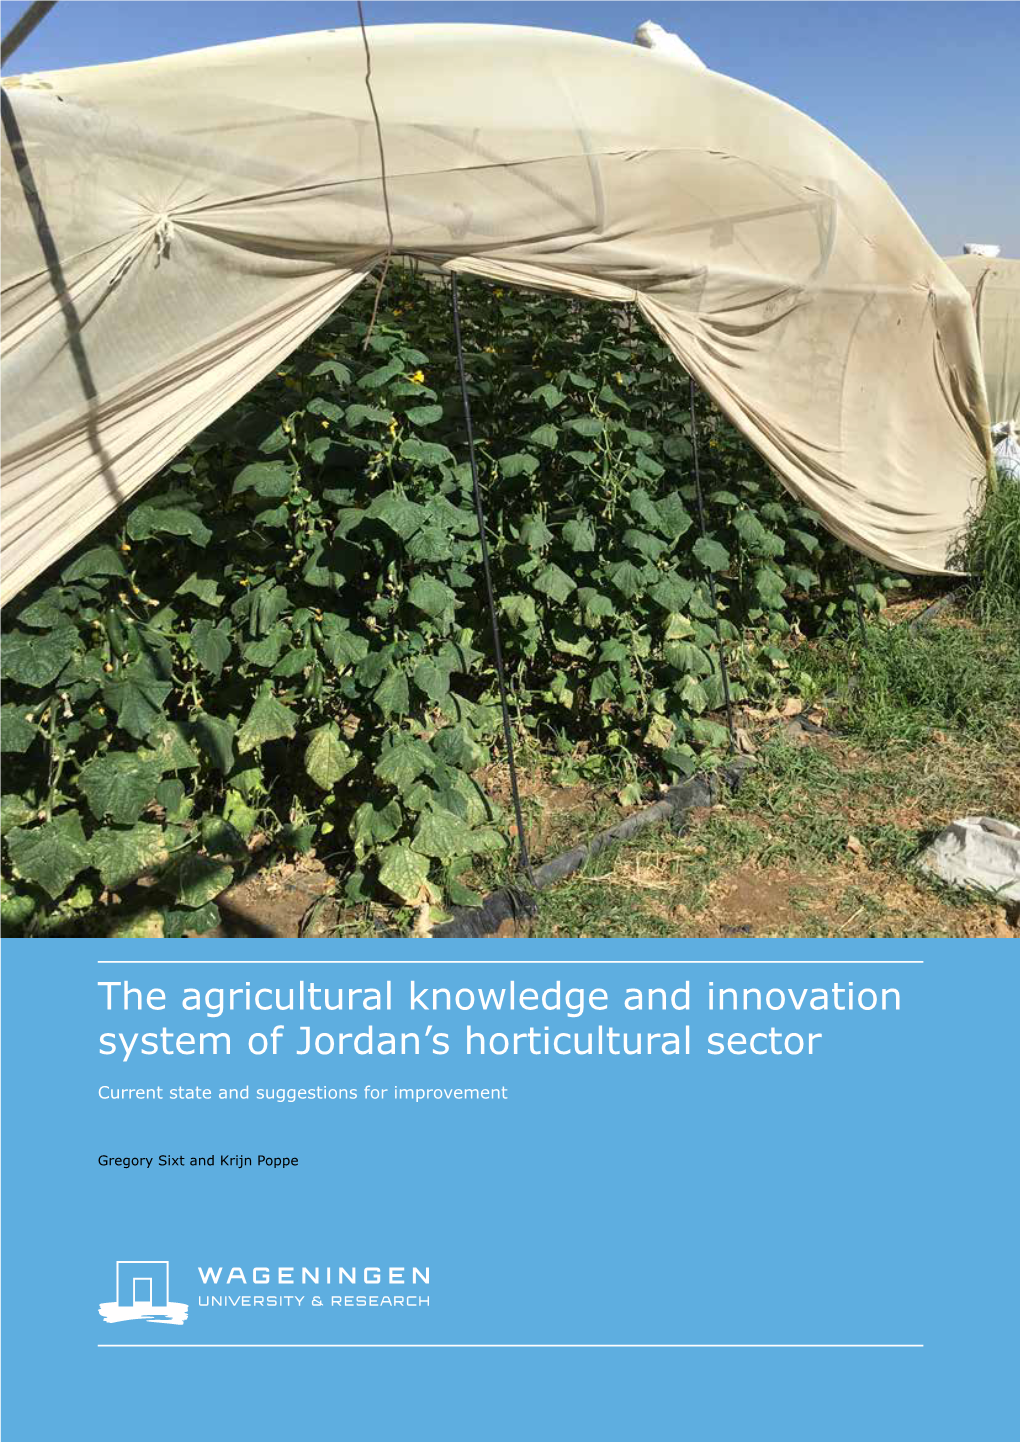 The Agricultural Knowledge and Innovation System of Jordan's